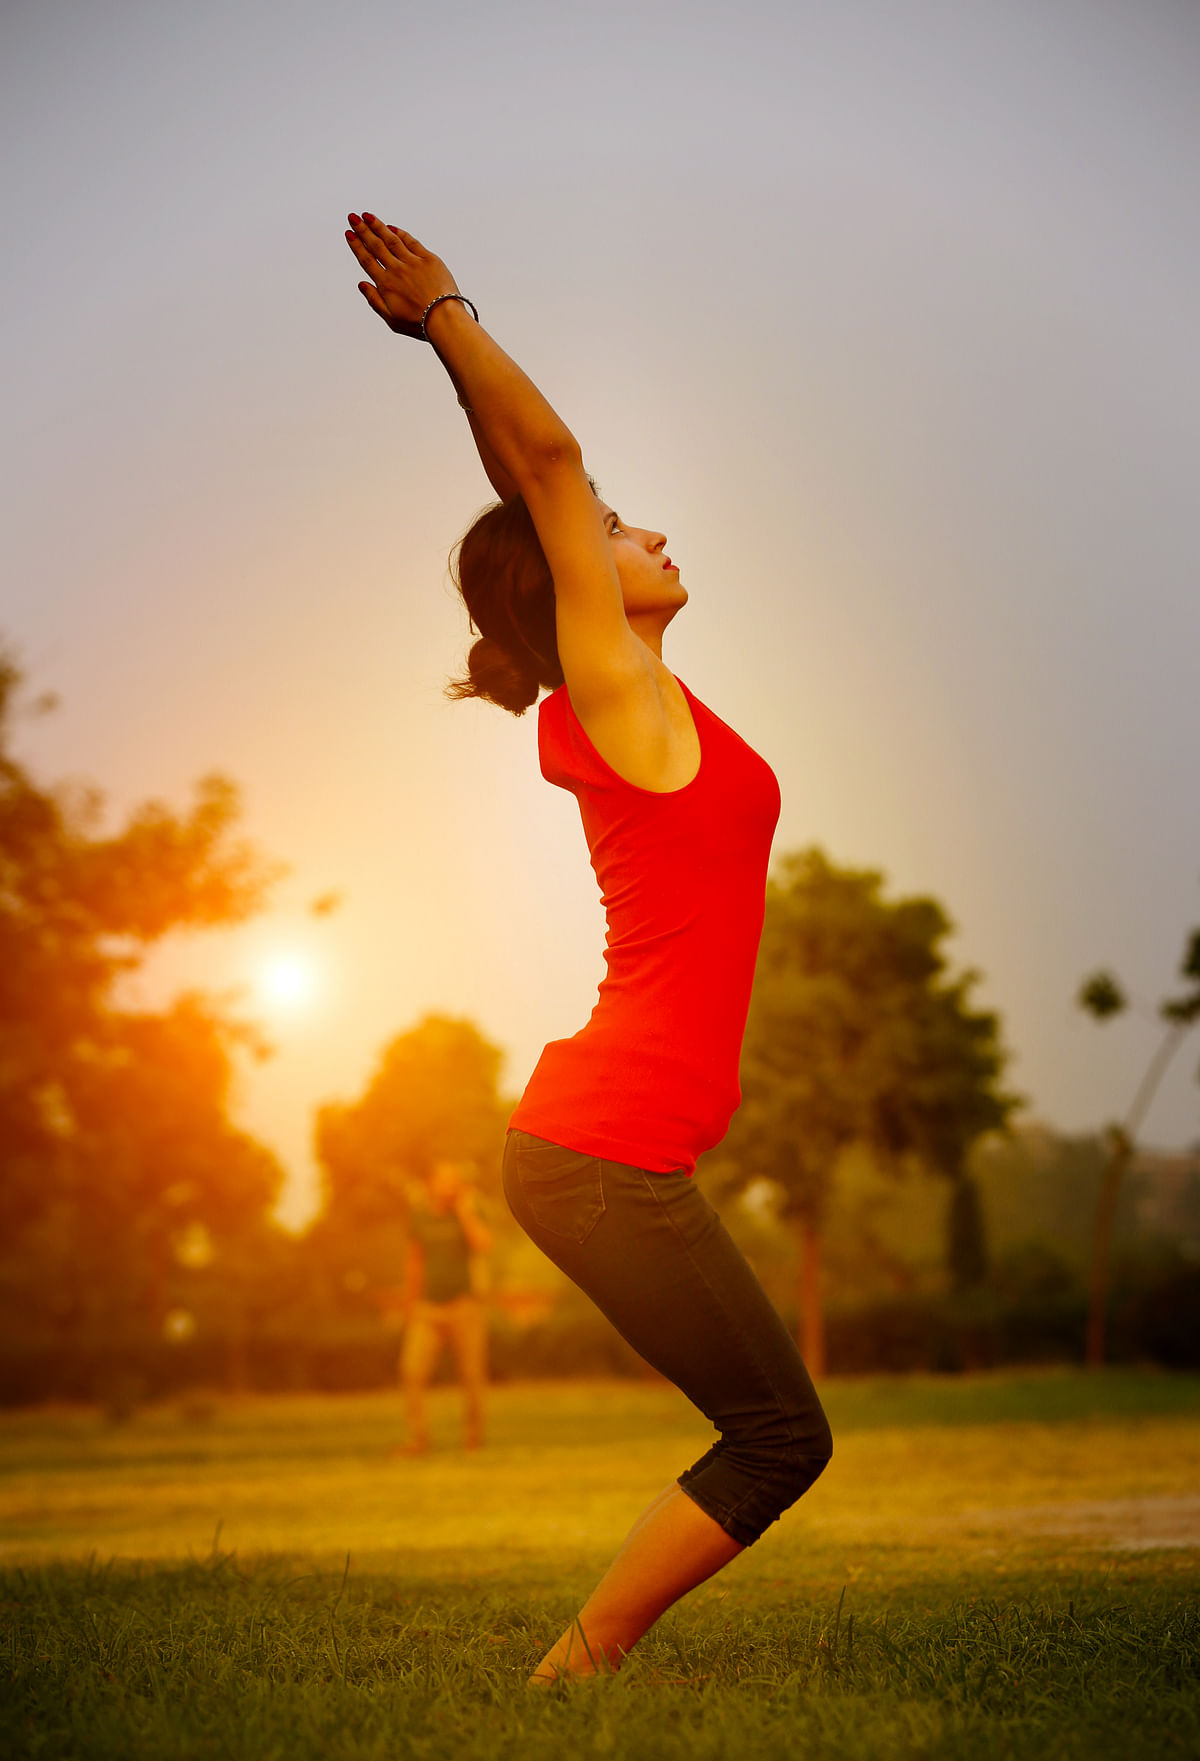 Yoga Day: Contrary to popular belief, yoga can help shed loads of calories and lose considerable amount of weight.